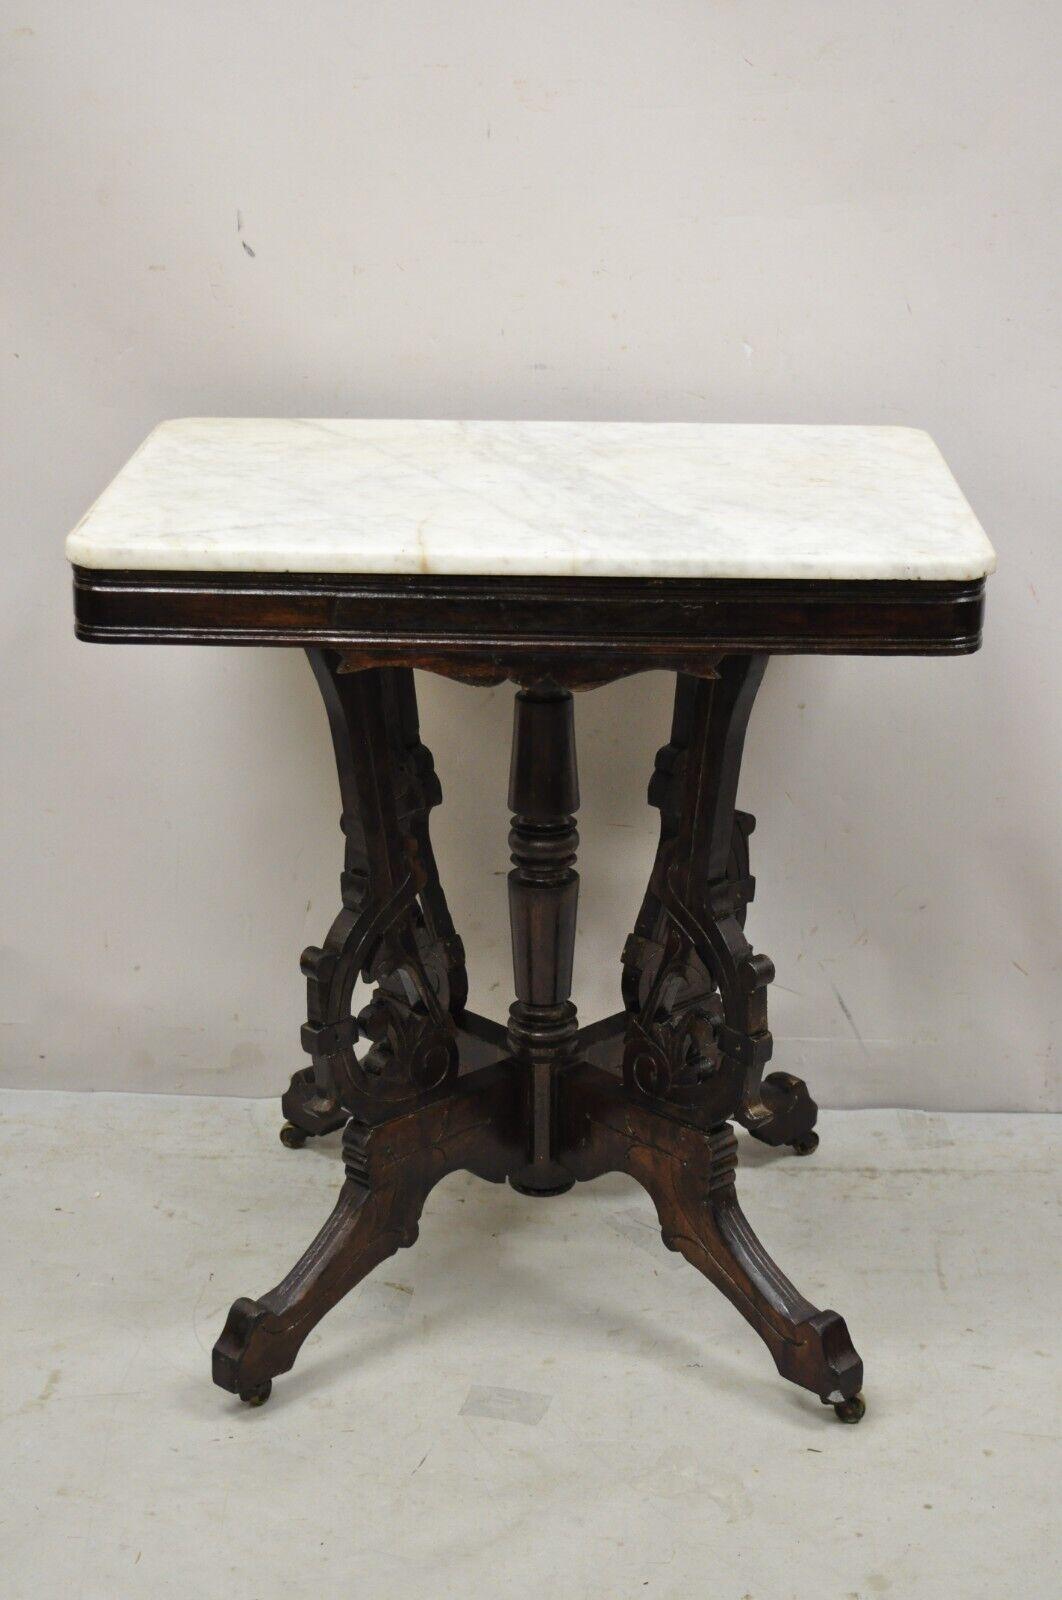 Antique Eastlake Victorian marble top walnut parlor accent side table. Item features a marble top, carved walnut base, very nice antique item. circa 19th century. Measurements: 29.5